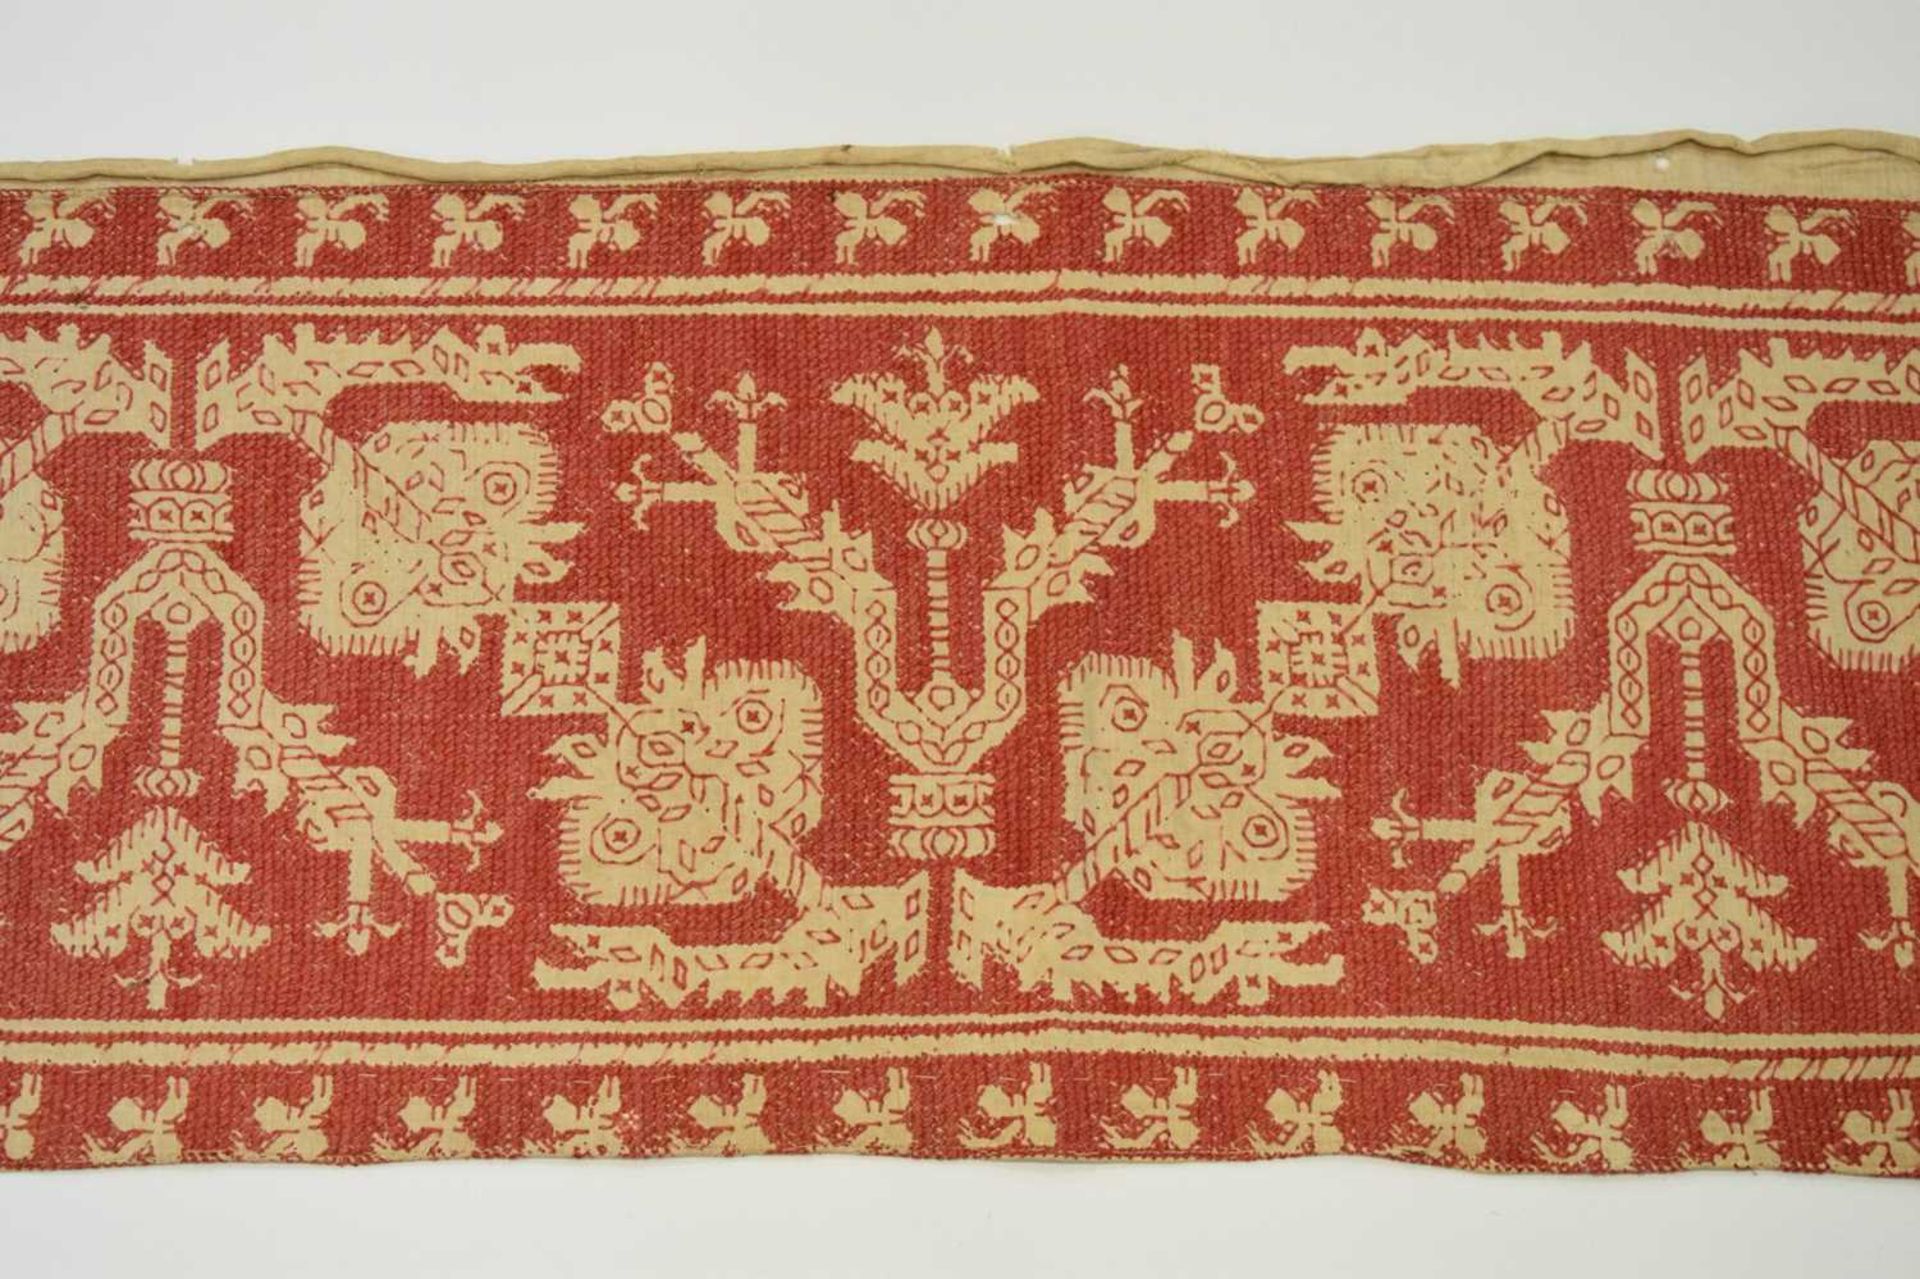 17th Century Italian embroided linen table runner - Image 3 of 8